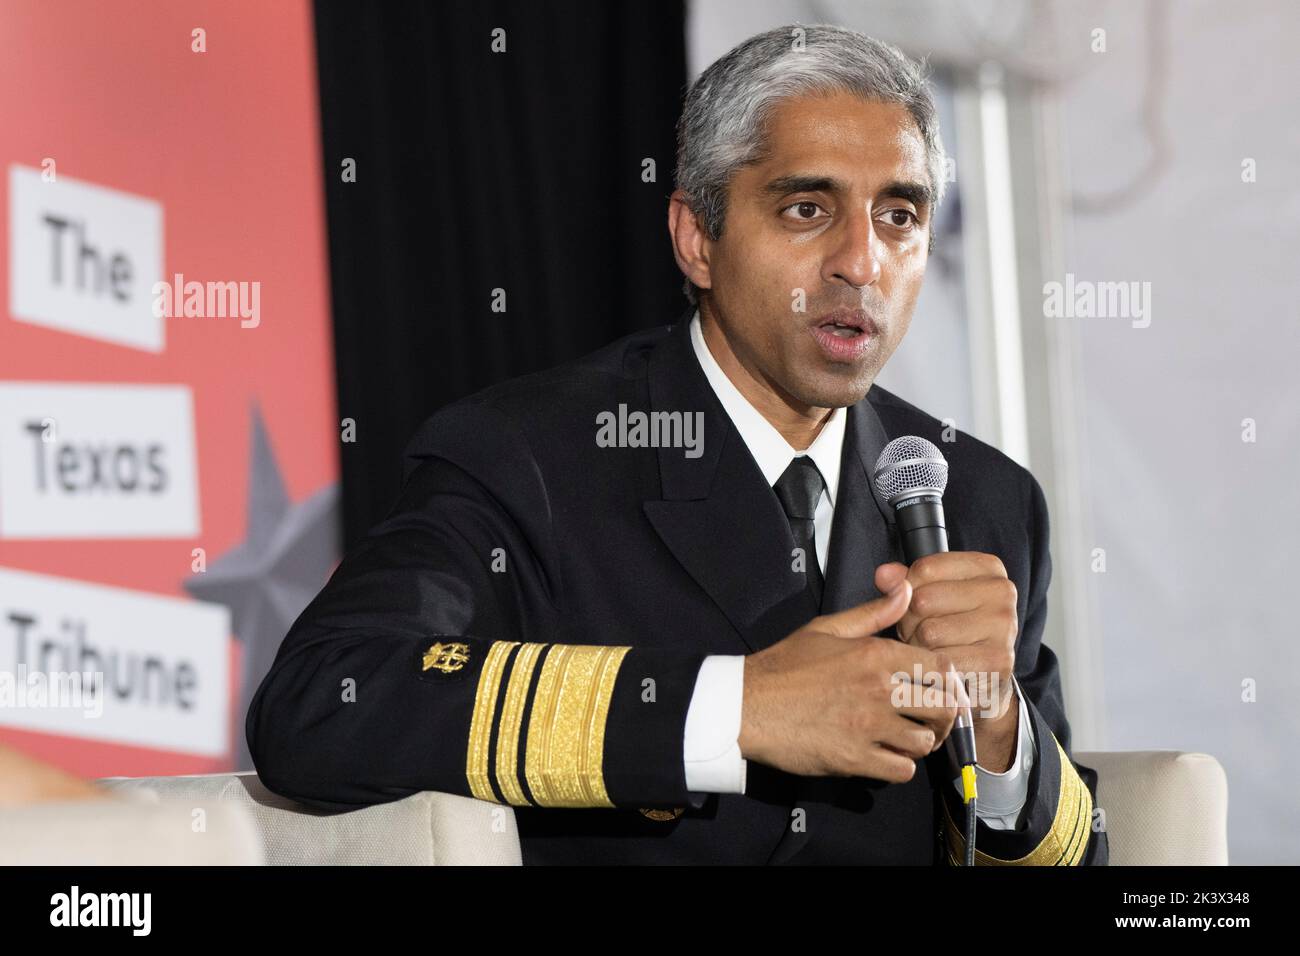 Surgeon General of the U.S., VIVEK MURTHY gives facts about the Coronavirus epedemic during an interview session at the annual Texas Tribune Festival in downtown Austin on September 24, 2022. Stock Photo